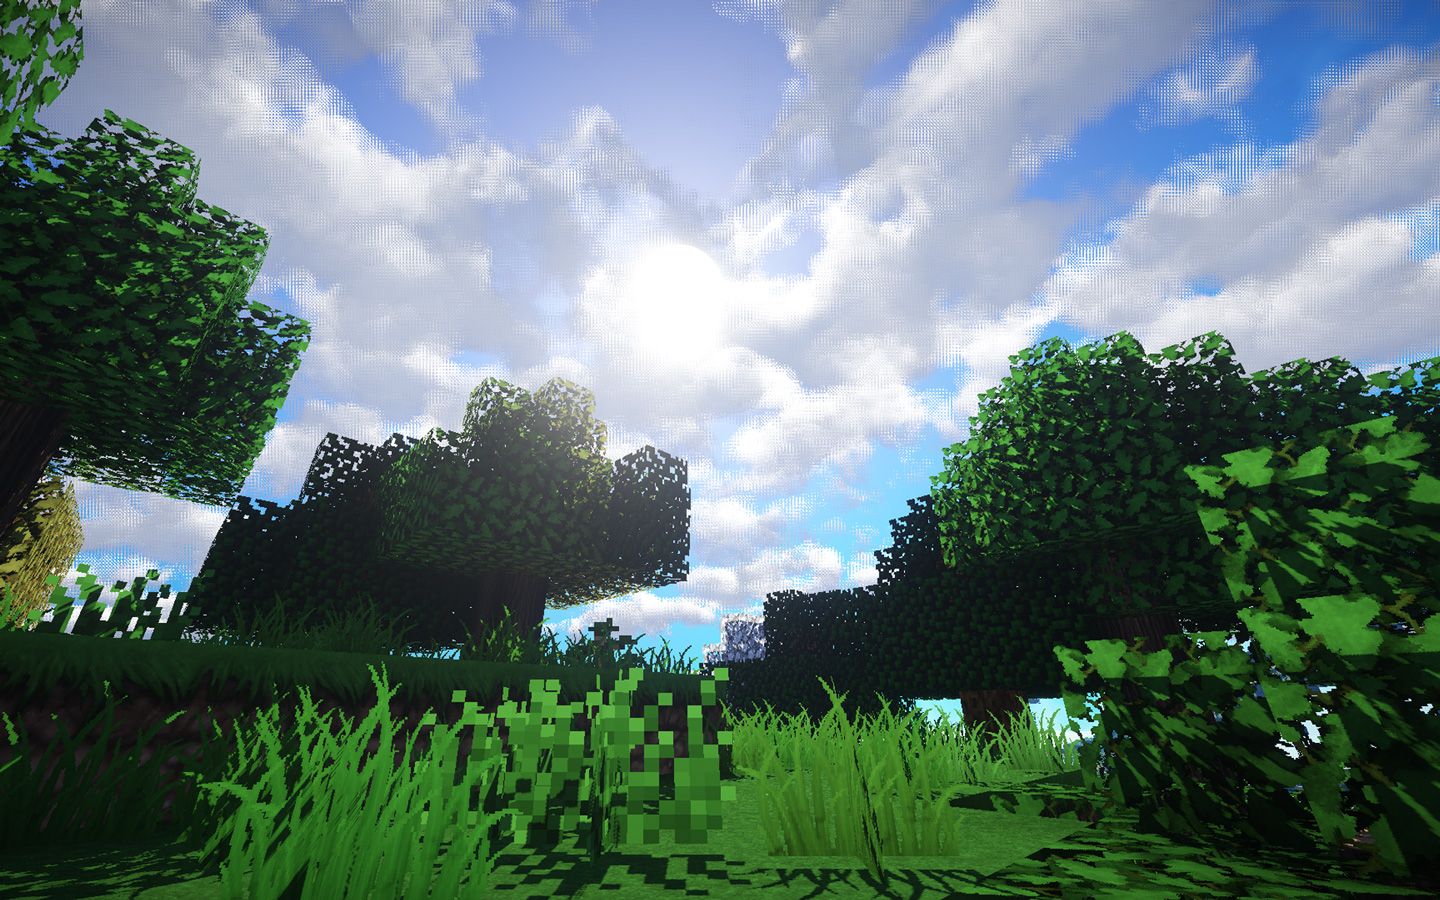 A grassy field with trees and clouds in the background - Minecraft